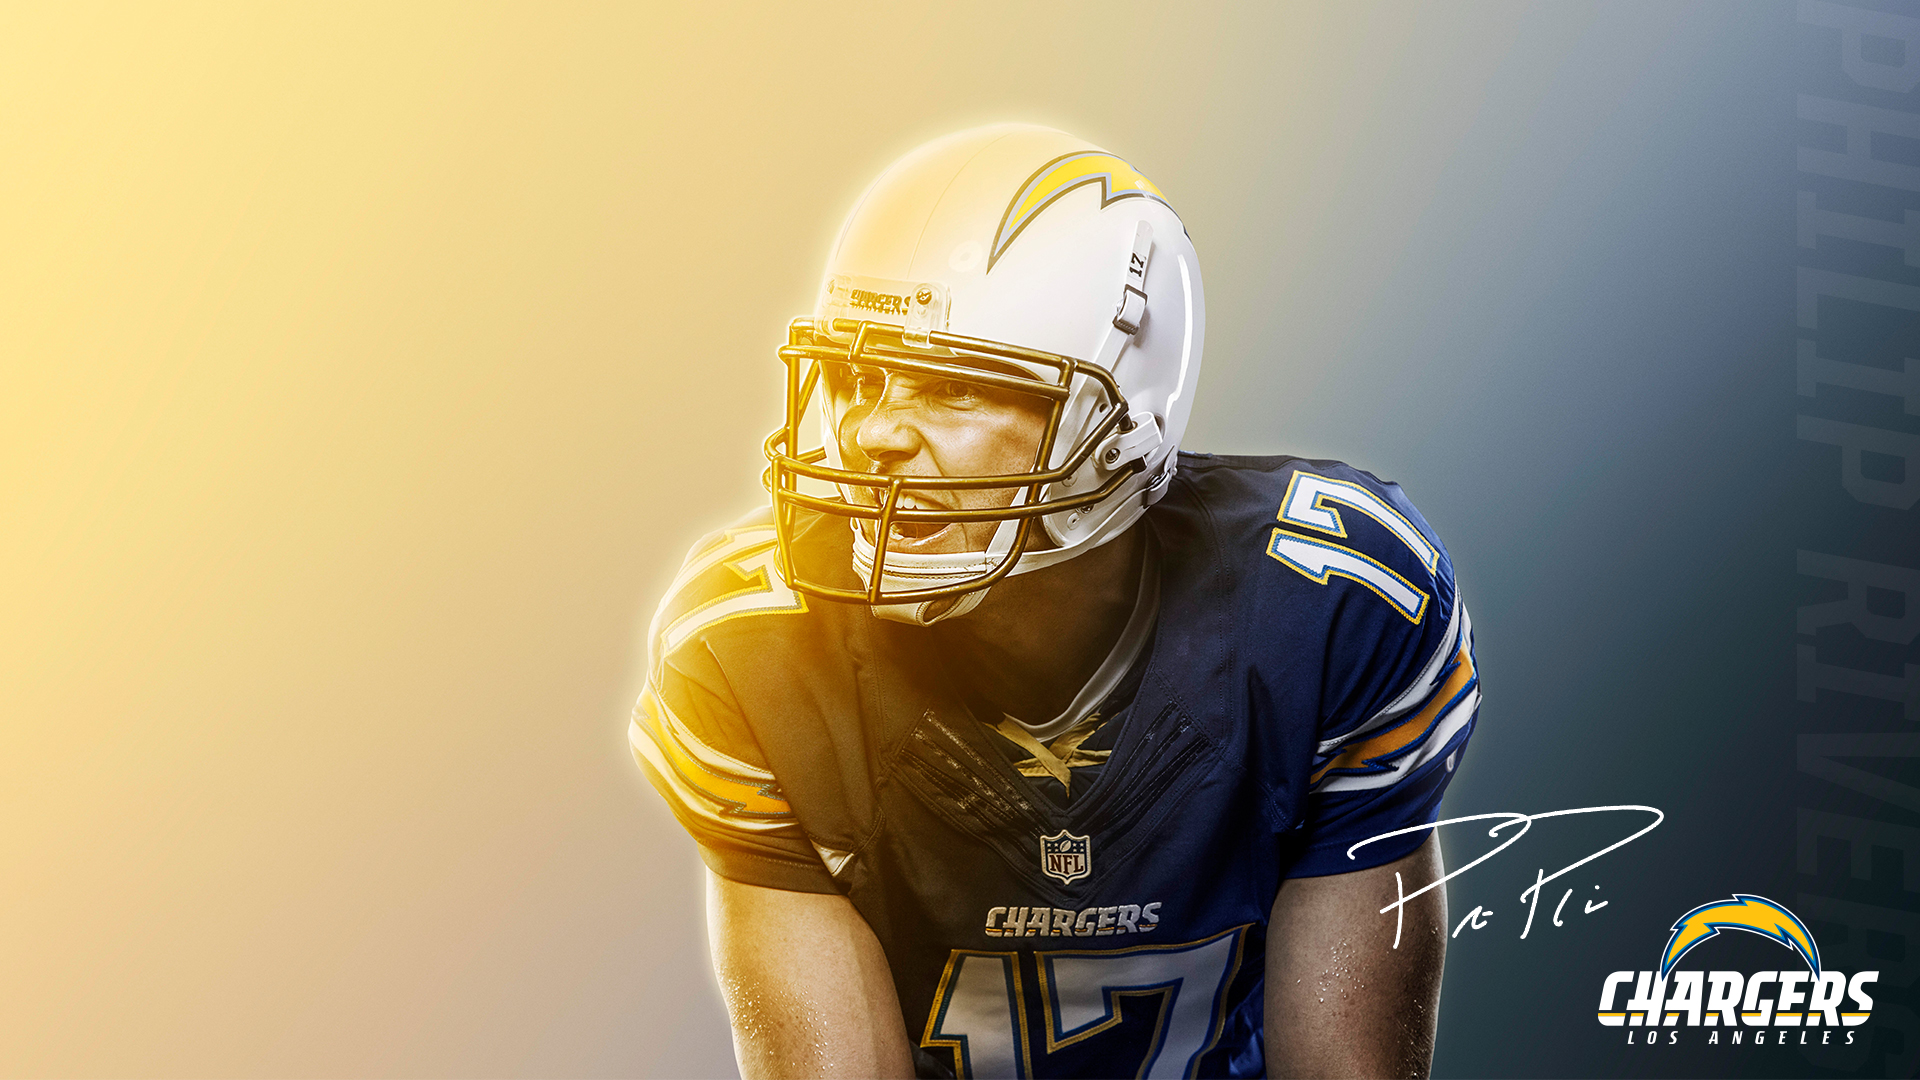 Los Angeles Chargers Wallpaper Free Los Angeles Chargers